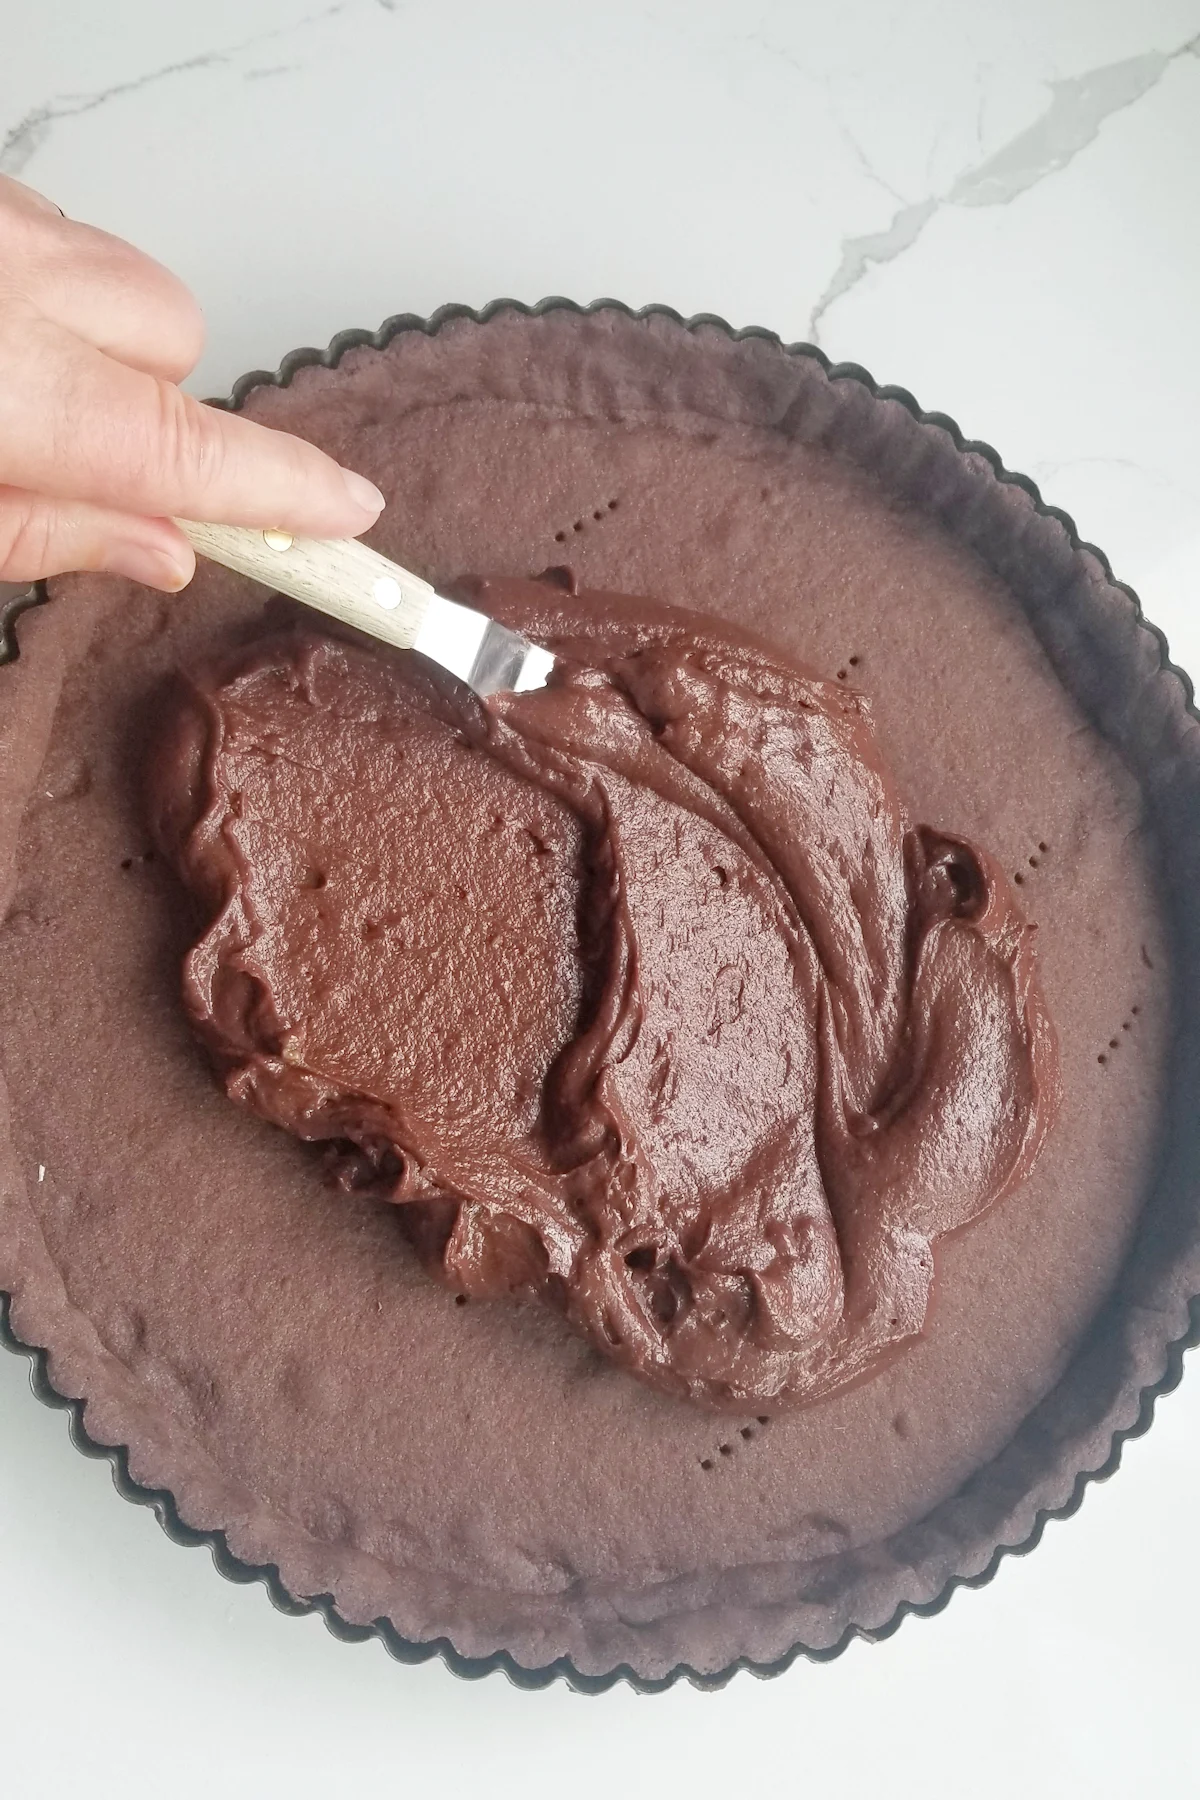 chocolate pastry cream being spread into a chocolate crust